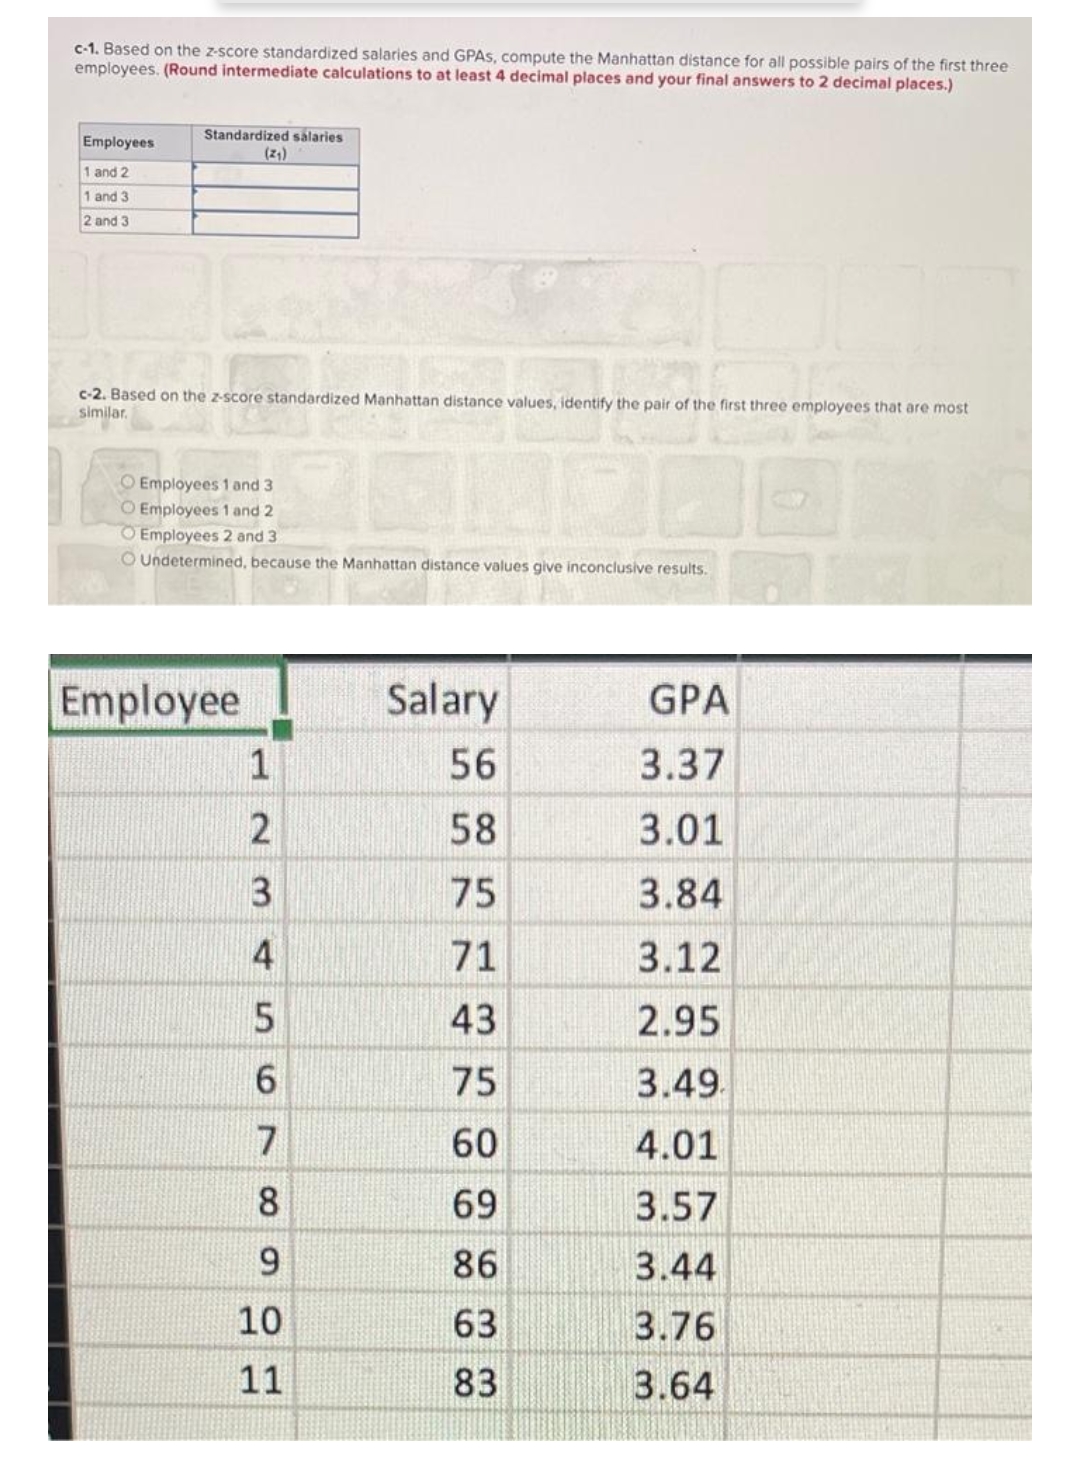 c-1. Based on the z-score standardized salaries and GPAS, compute the Manhattan distance for all possible pairs of the first three
employees. (Round intermediate calculations to at least 4 decimal places and your final answers to 2 decimal places.)
Employees
1 and 2
1 and 3
2 and 3
Standardized salaries
(2₁)
c-2. Based on the z-score standardized Manhattan distance values, identify the pair of the first three employees that are most
similar.
Employees 1 and 3
100
O Employees 1 and 2
O Employees 2 and 3
O Undetermined, because the Manhattan distance values give inconclusive results.
Employee
1
2
345
6
7
8
9
10
11
Salary
56
58
75
71
43
75
60
69
86
63
83
GPA
3.37
3.01
3.84
3.12
2.95
3.49.
4.01
3.57
3.44
3.76
3.64